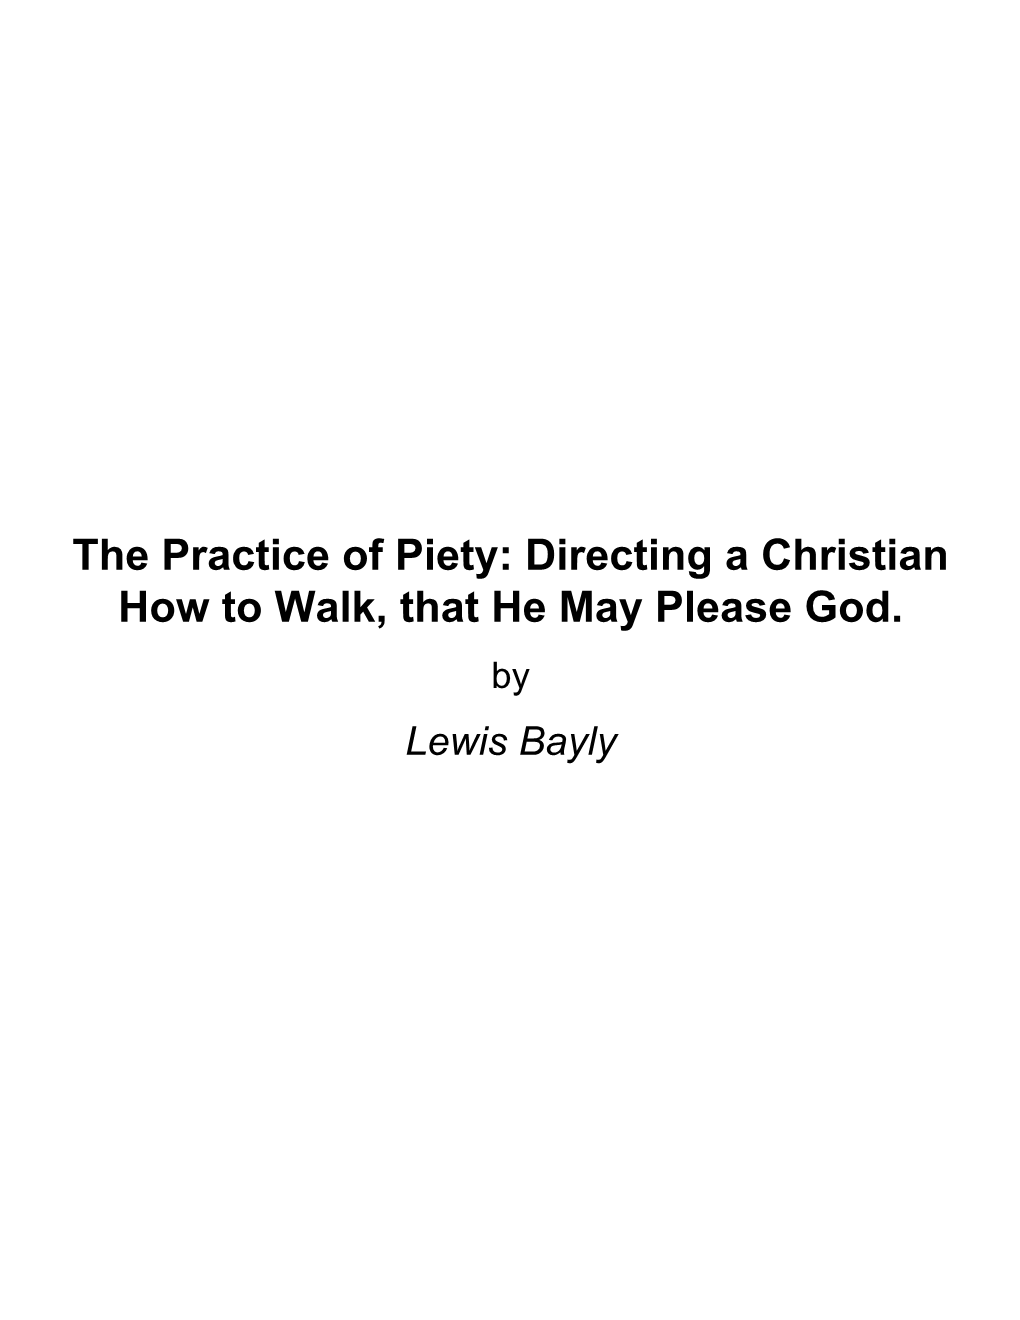 The Practice of Piety: Directing a Christian How to Walk, That He May Please God